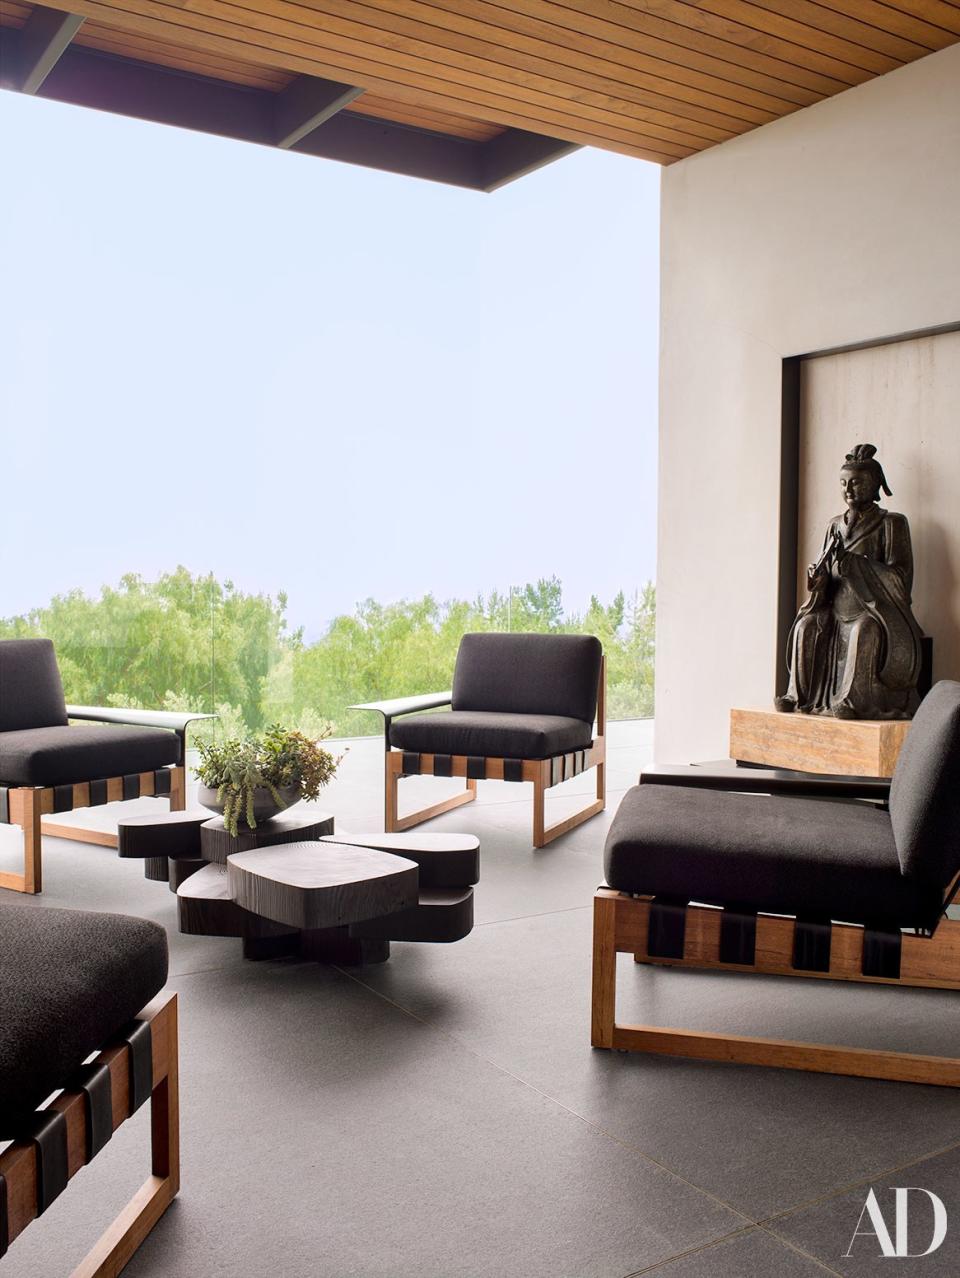 Custom teak, leather, and bronze chairs by Shadley surround a cocktail table on a terrace. Antique bronze Chinese statue.